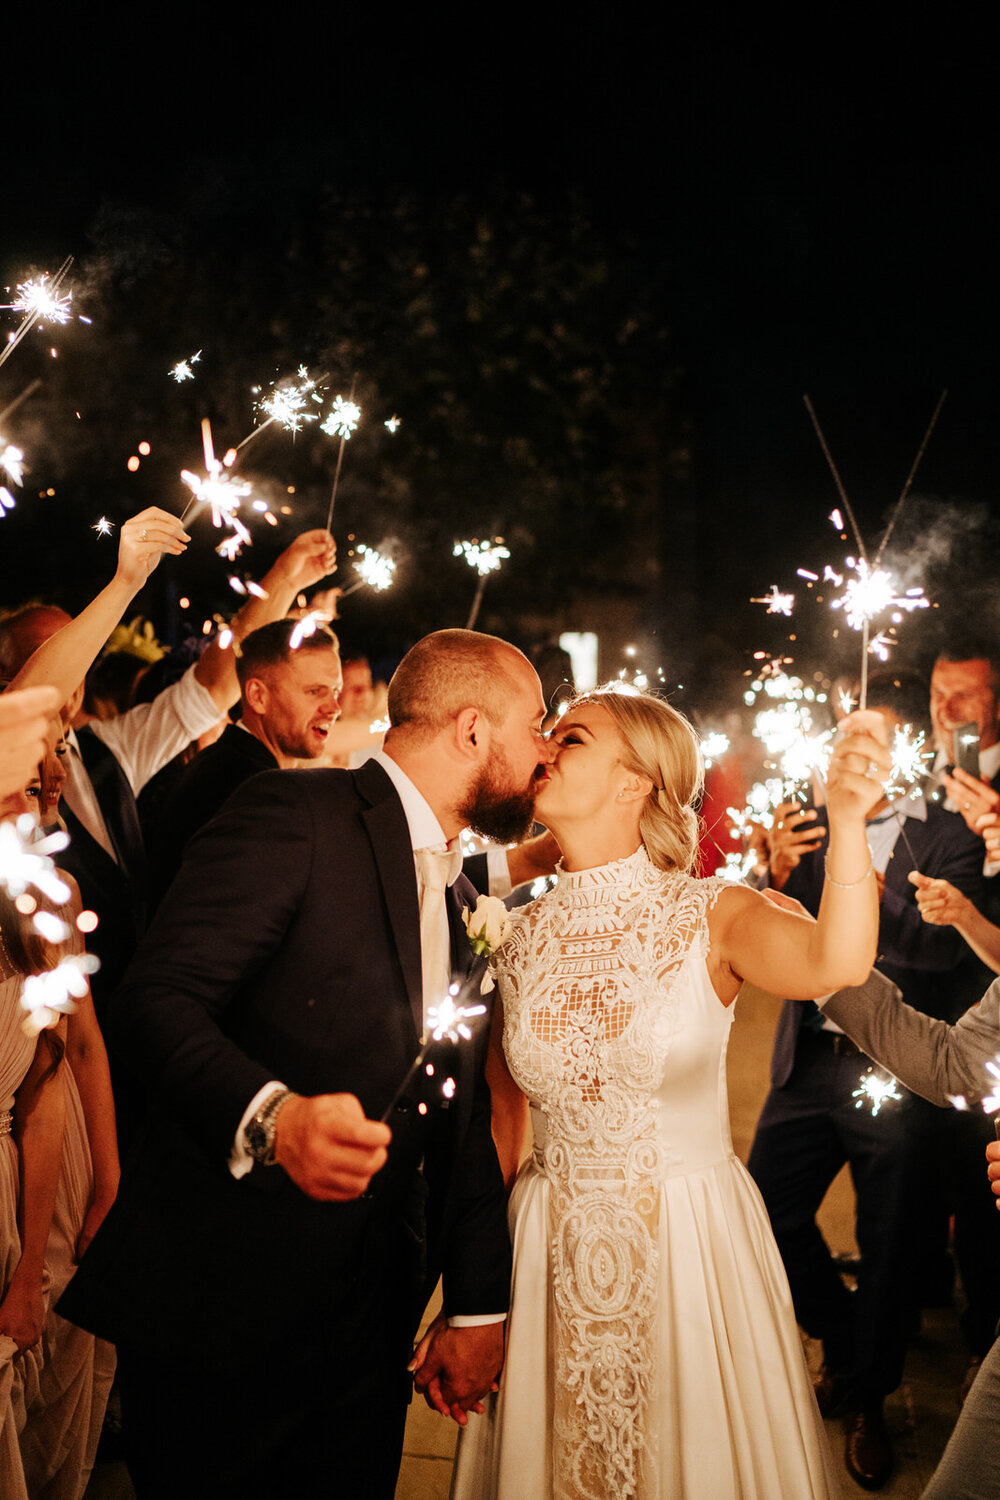 Guests form a tunnel of sparklers around the bride and groom as they hold sparklers and kiss in gorgeous framing outside at Pembroke Lodge during nighttime